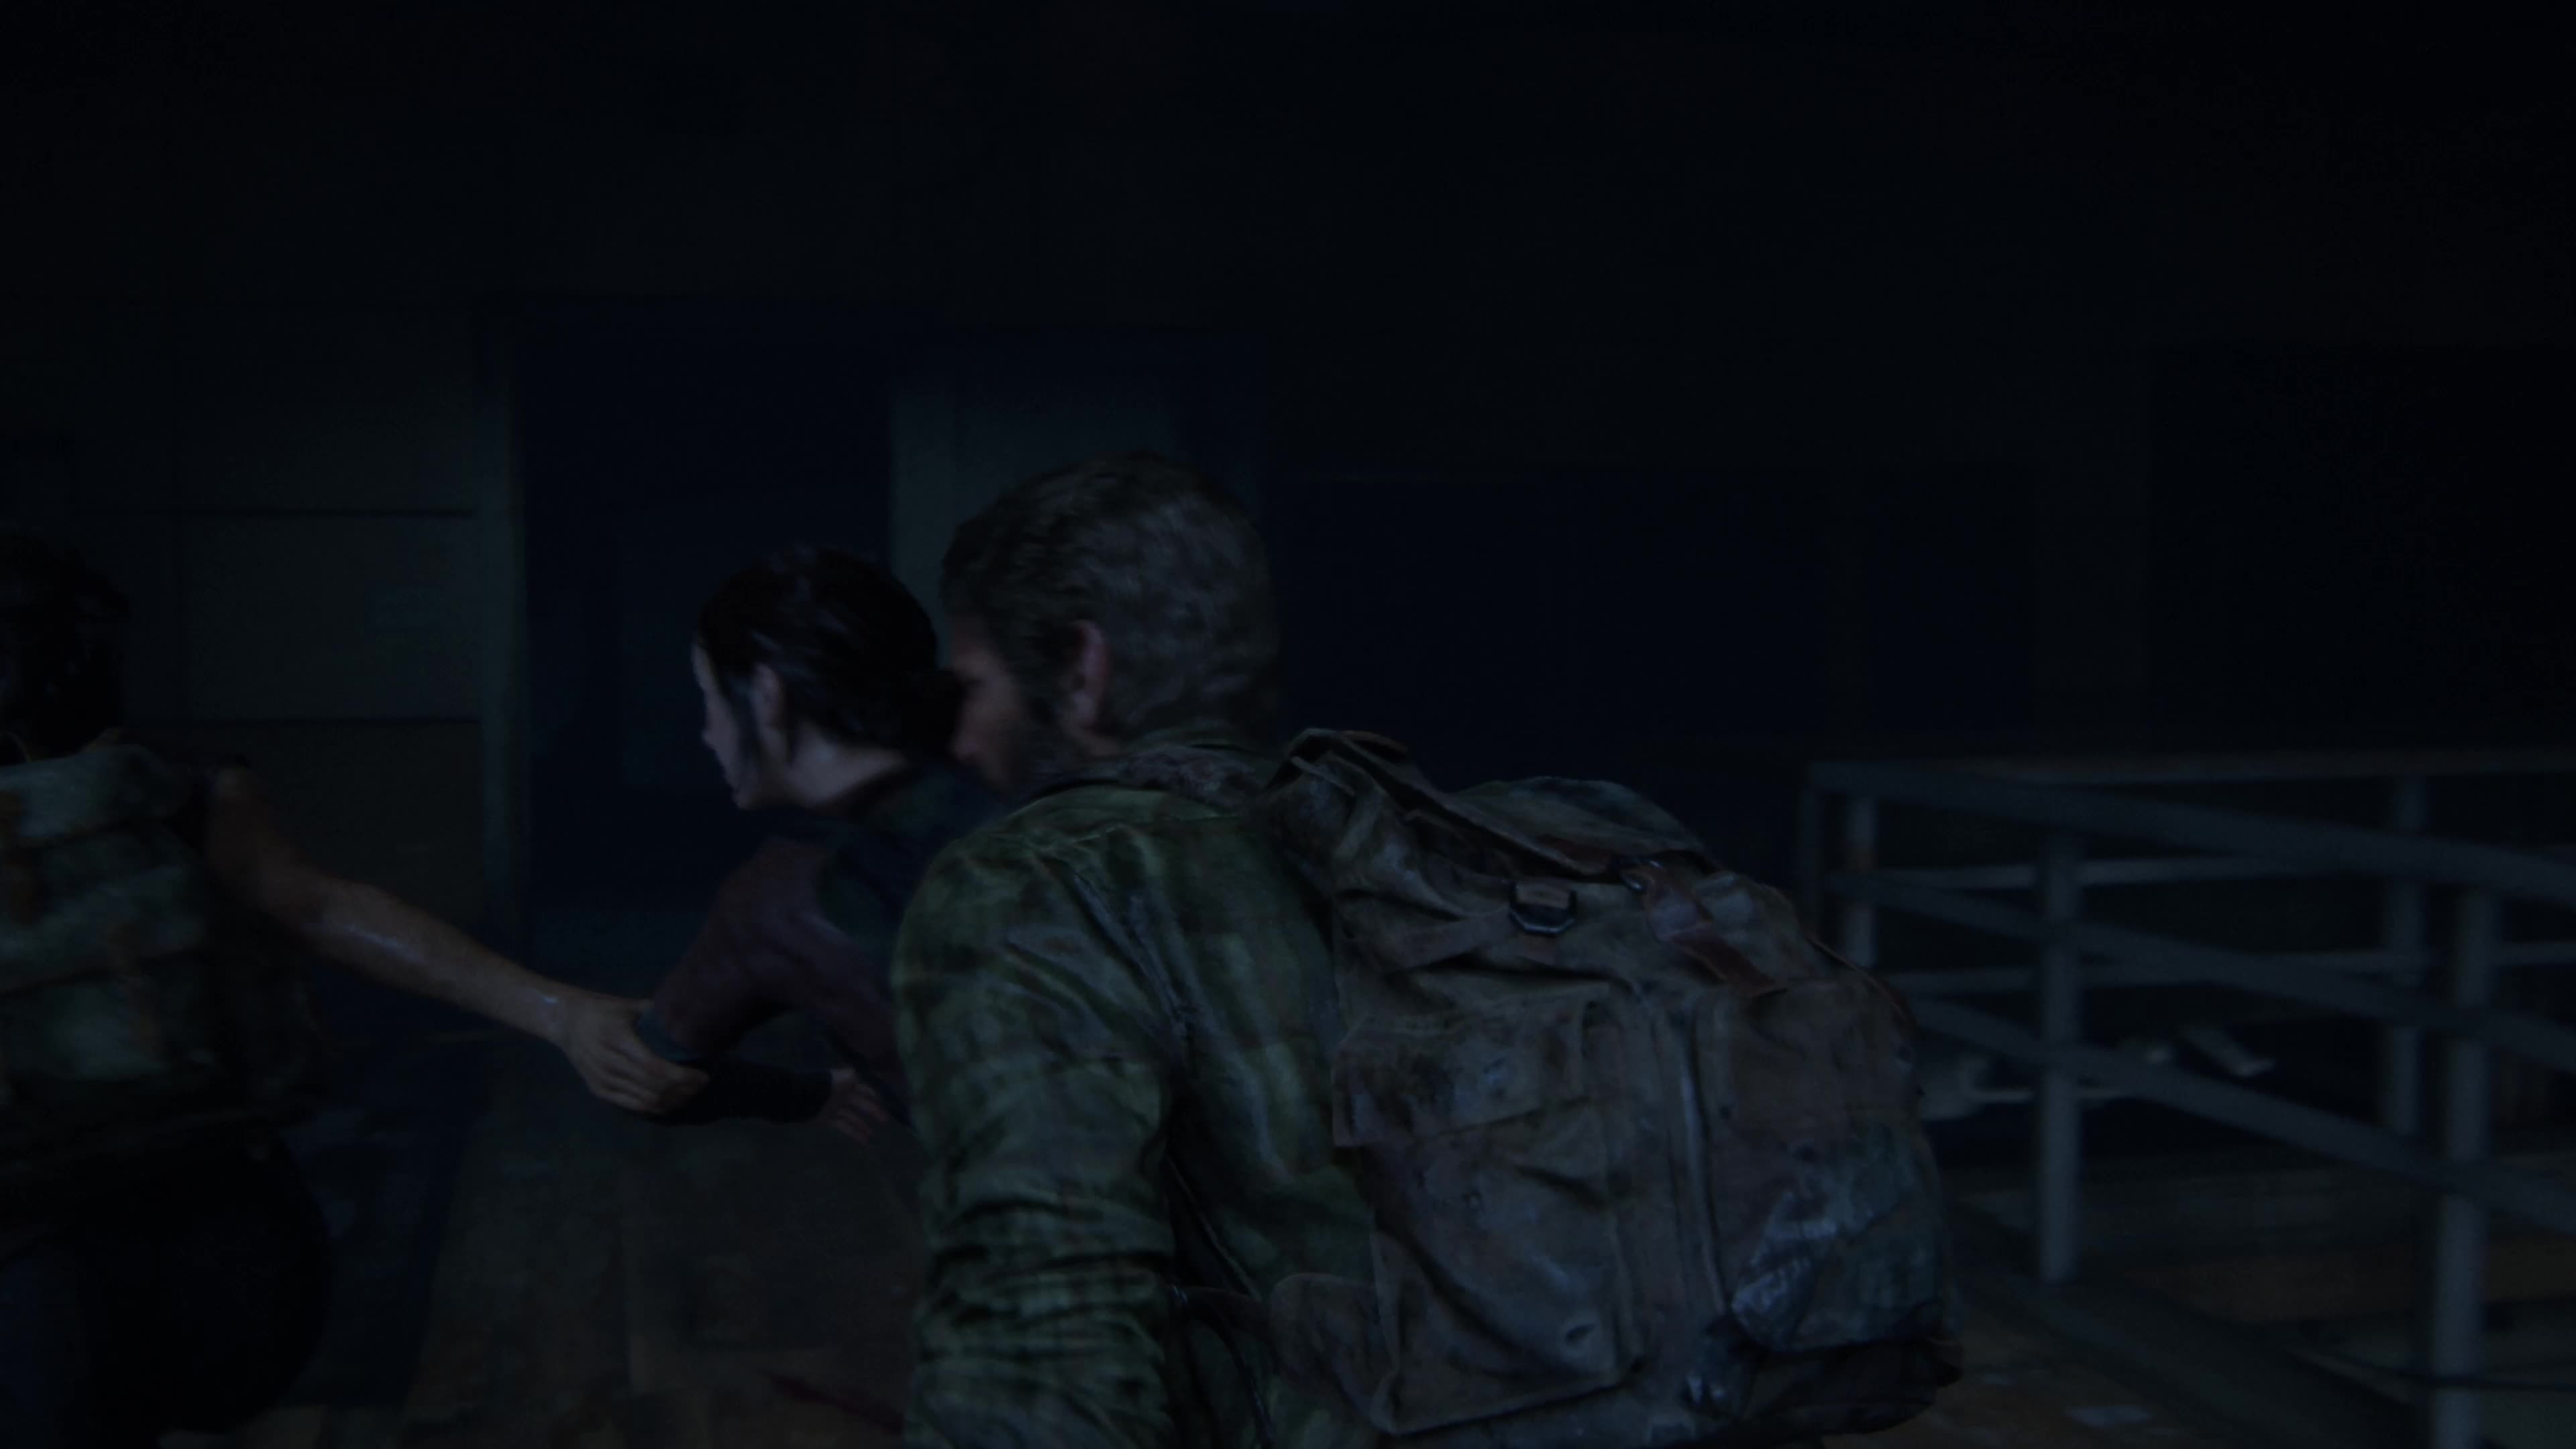 The Last of Us Remake Reportedly Coming To PC With September Release Date